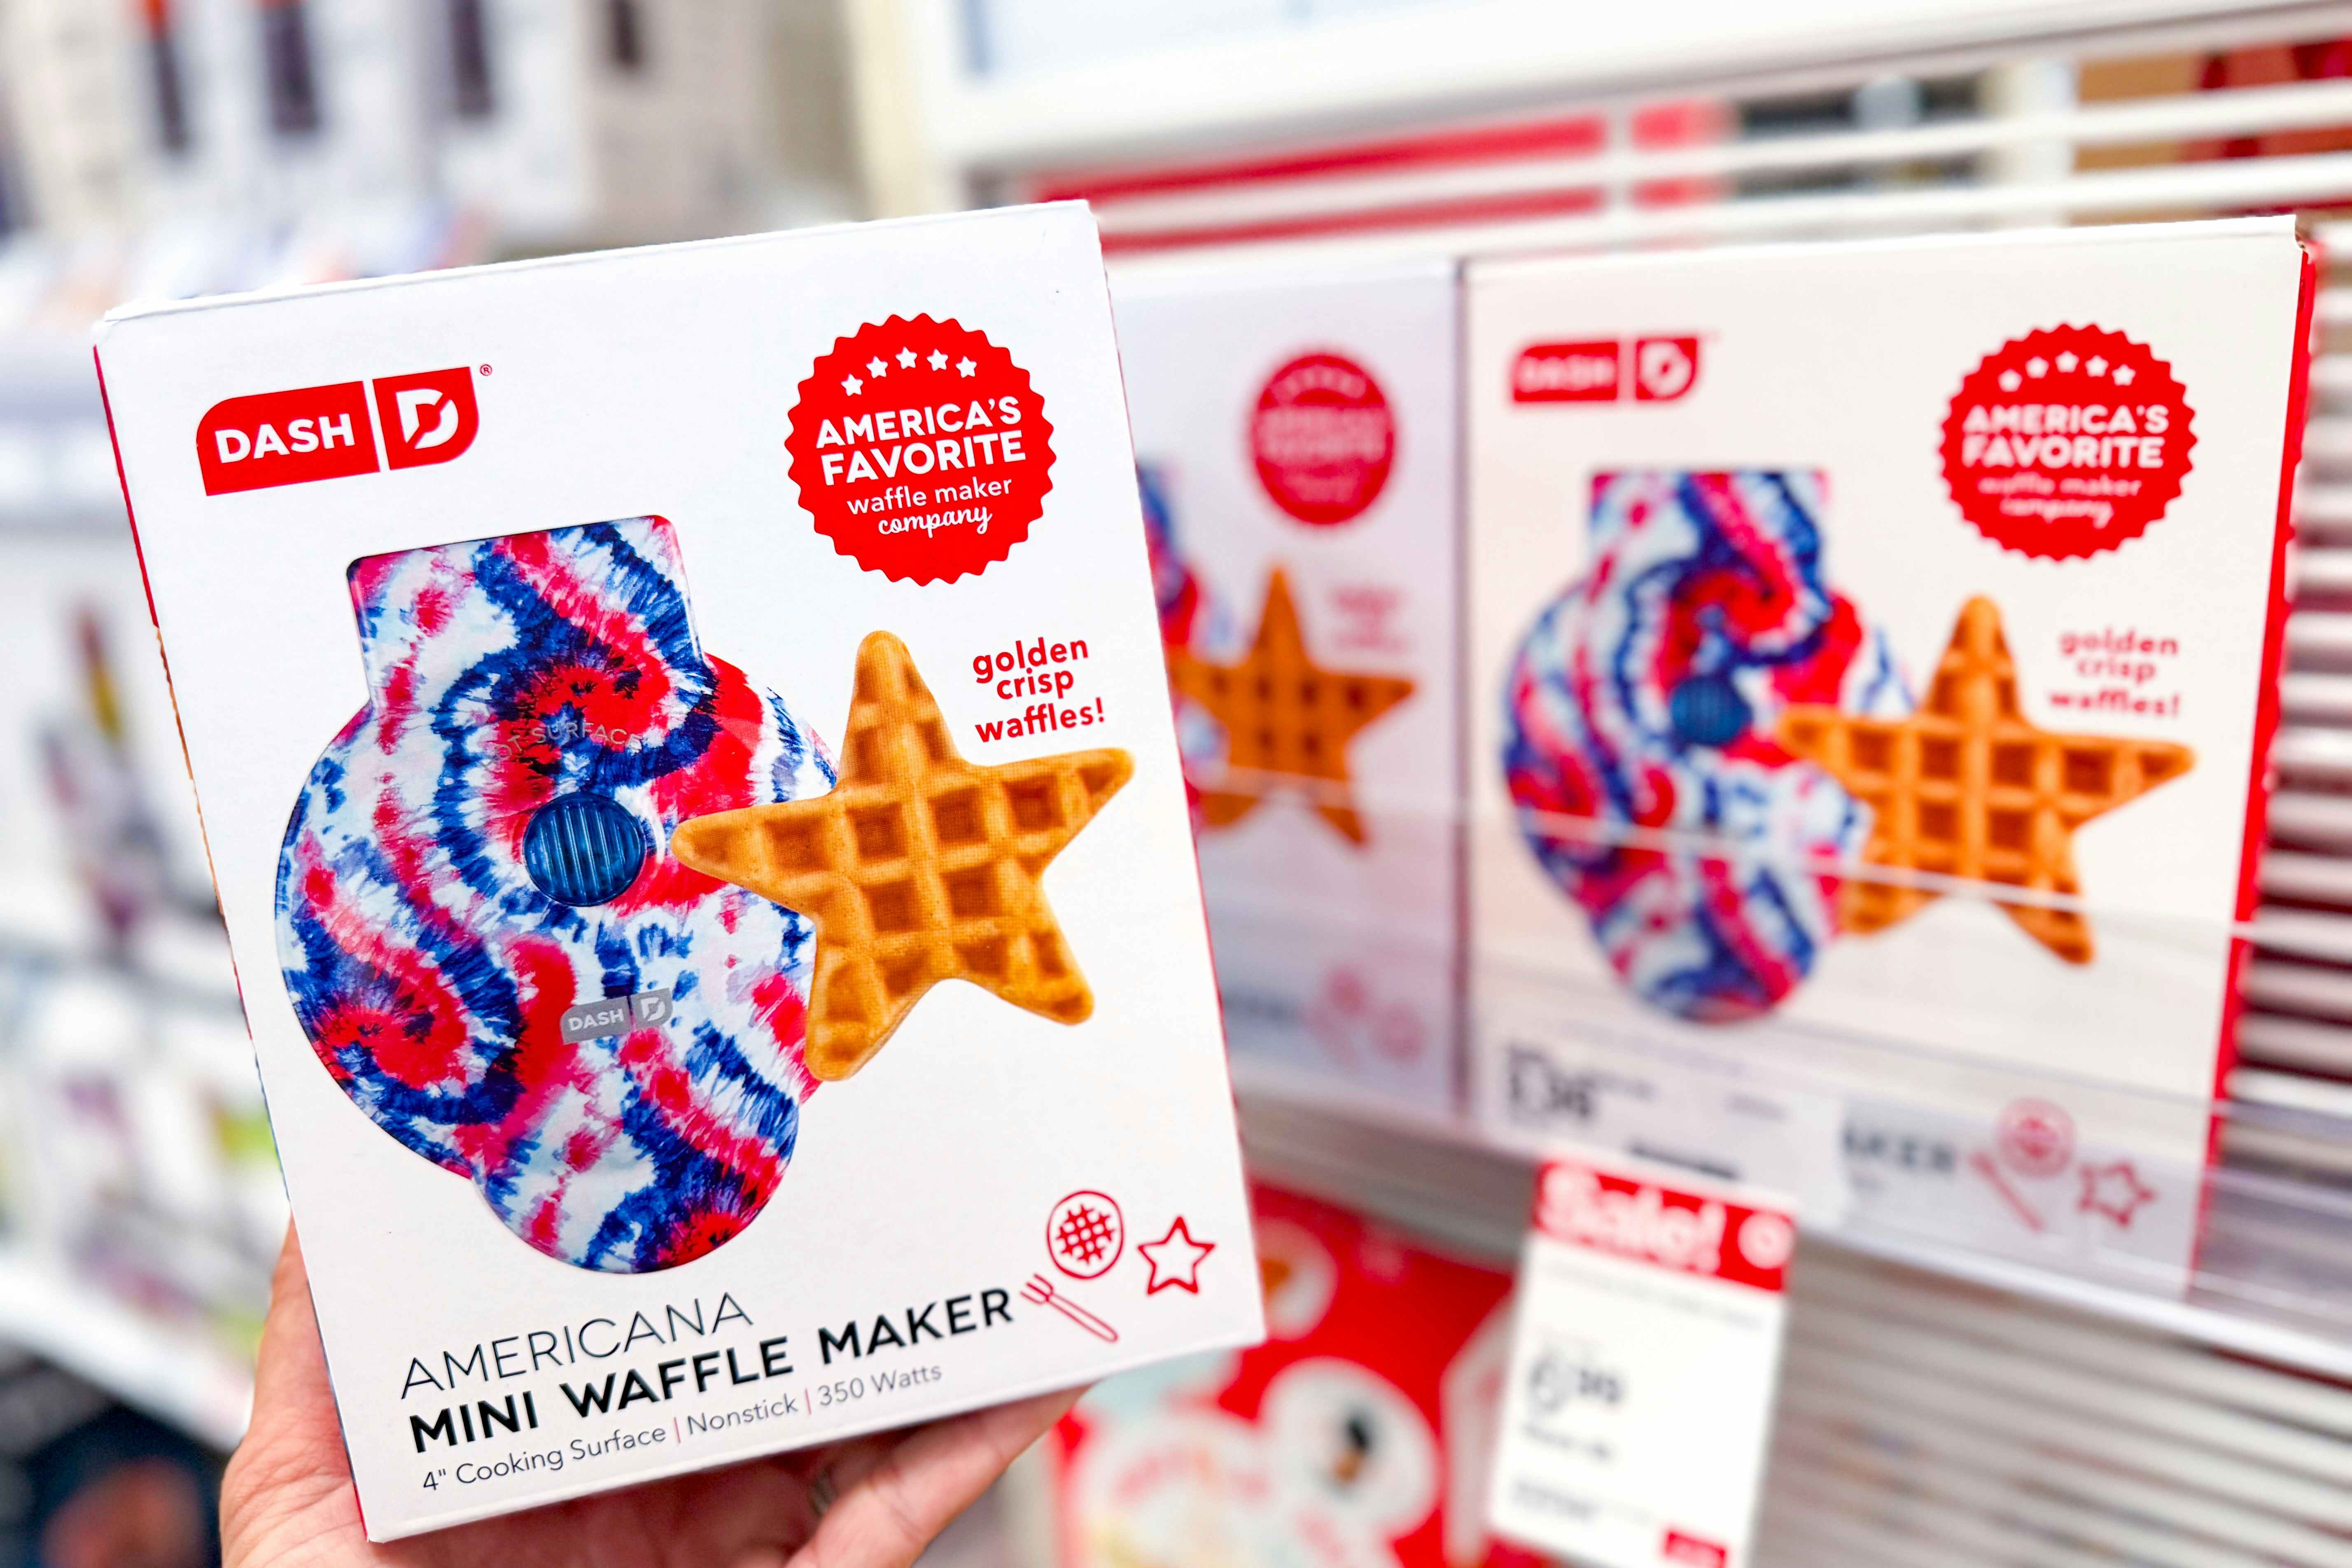 Dash Americana Waffle Makers, Only $6.64 at Target — Best Price Ever